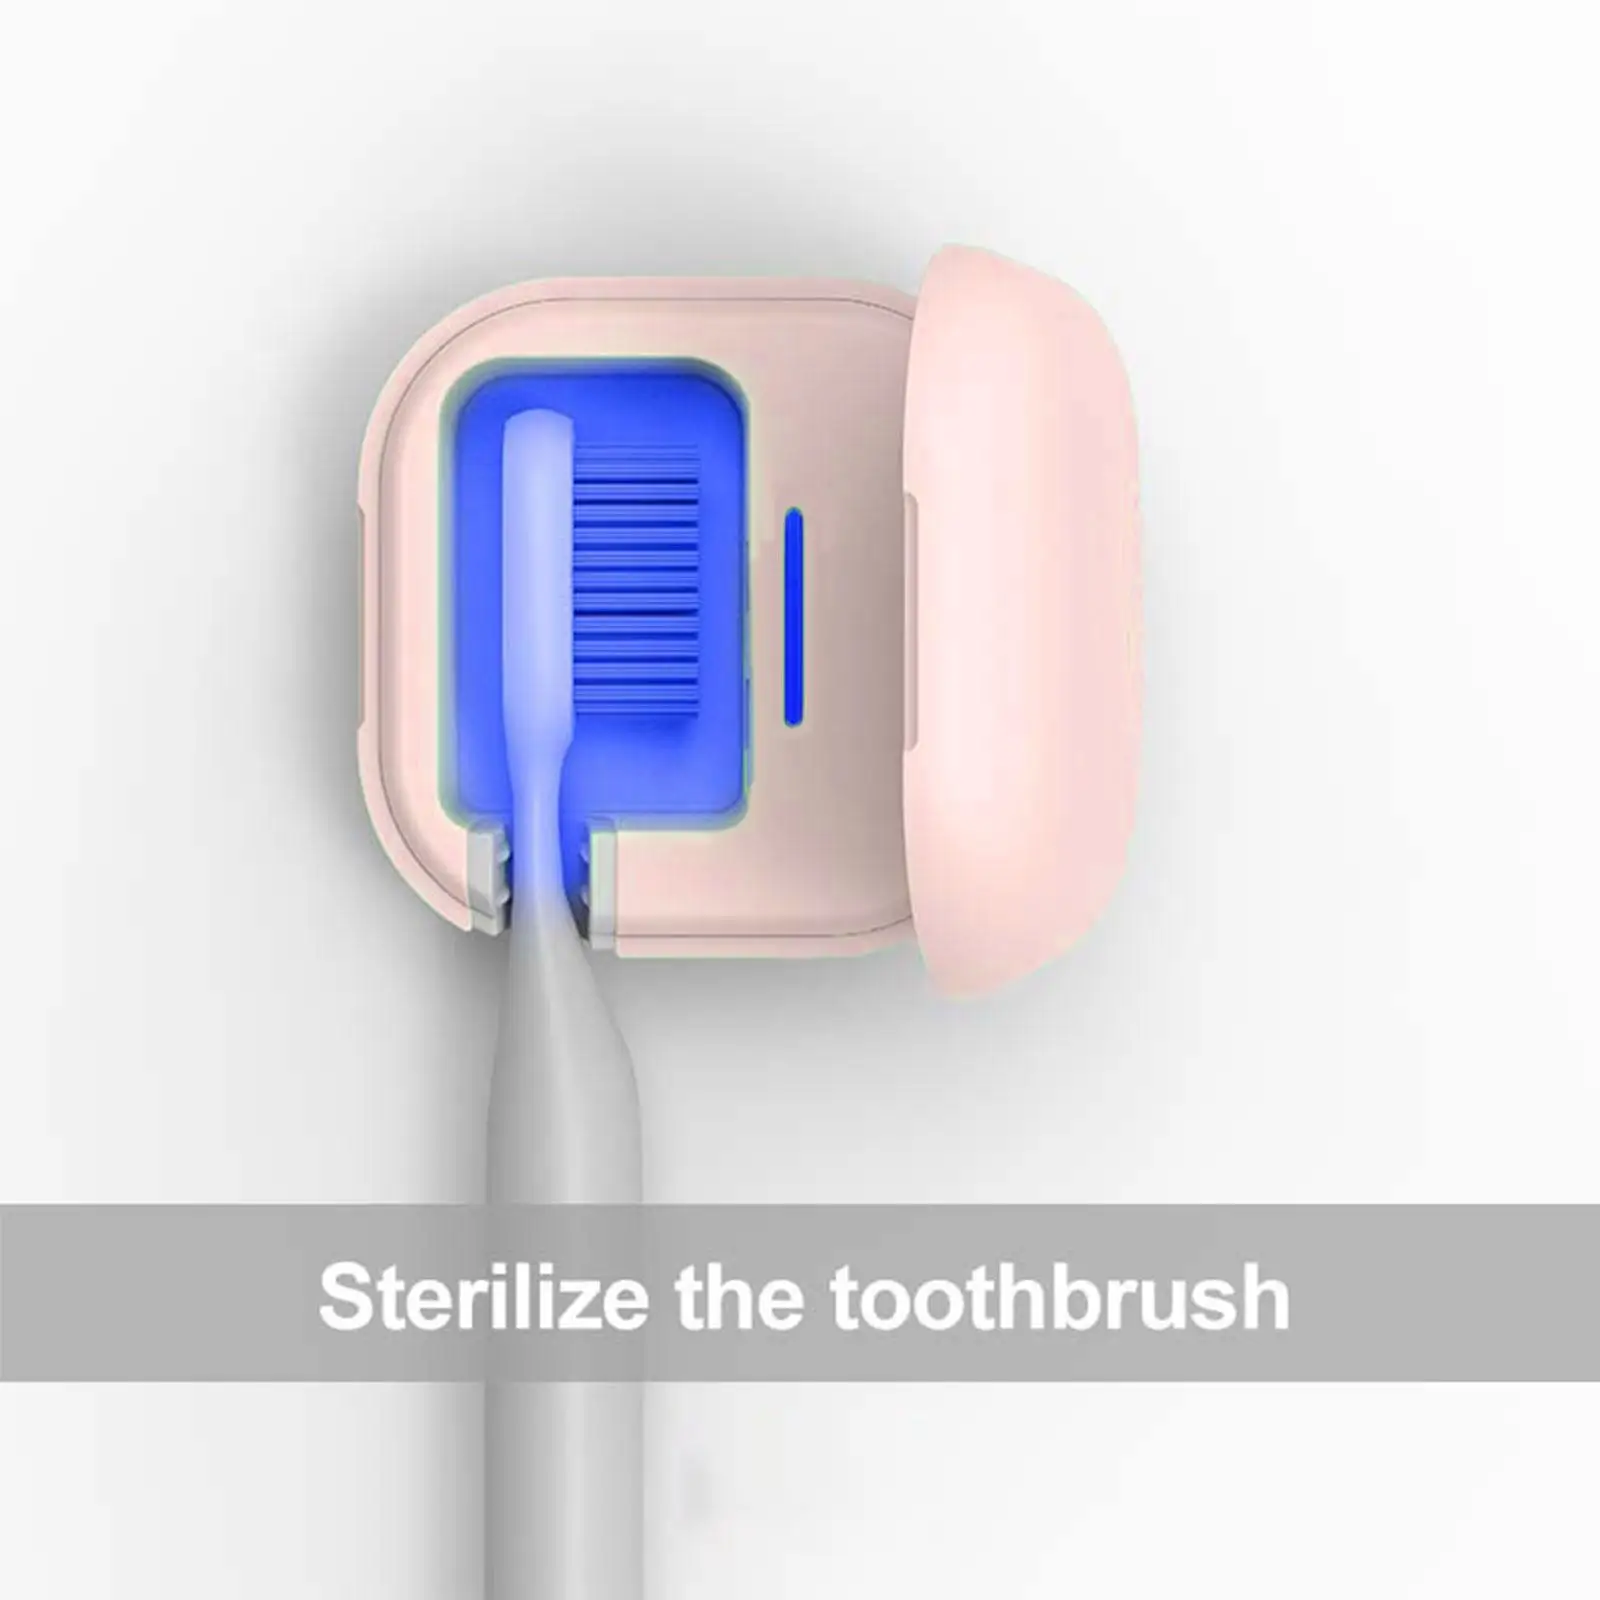 UV Toothbrush Sterilization Box UV Light Automatic Portable Toothbrush Holder for Traveling Electric Manual Toothbrushes Jewelry